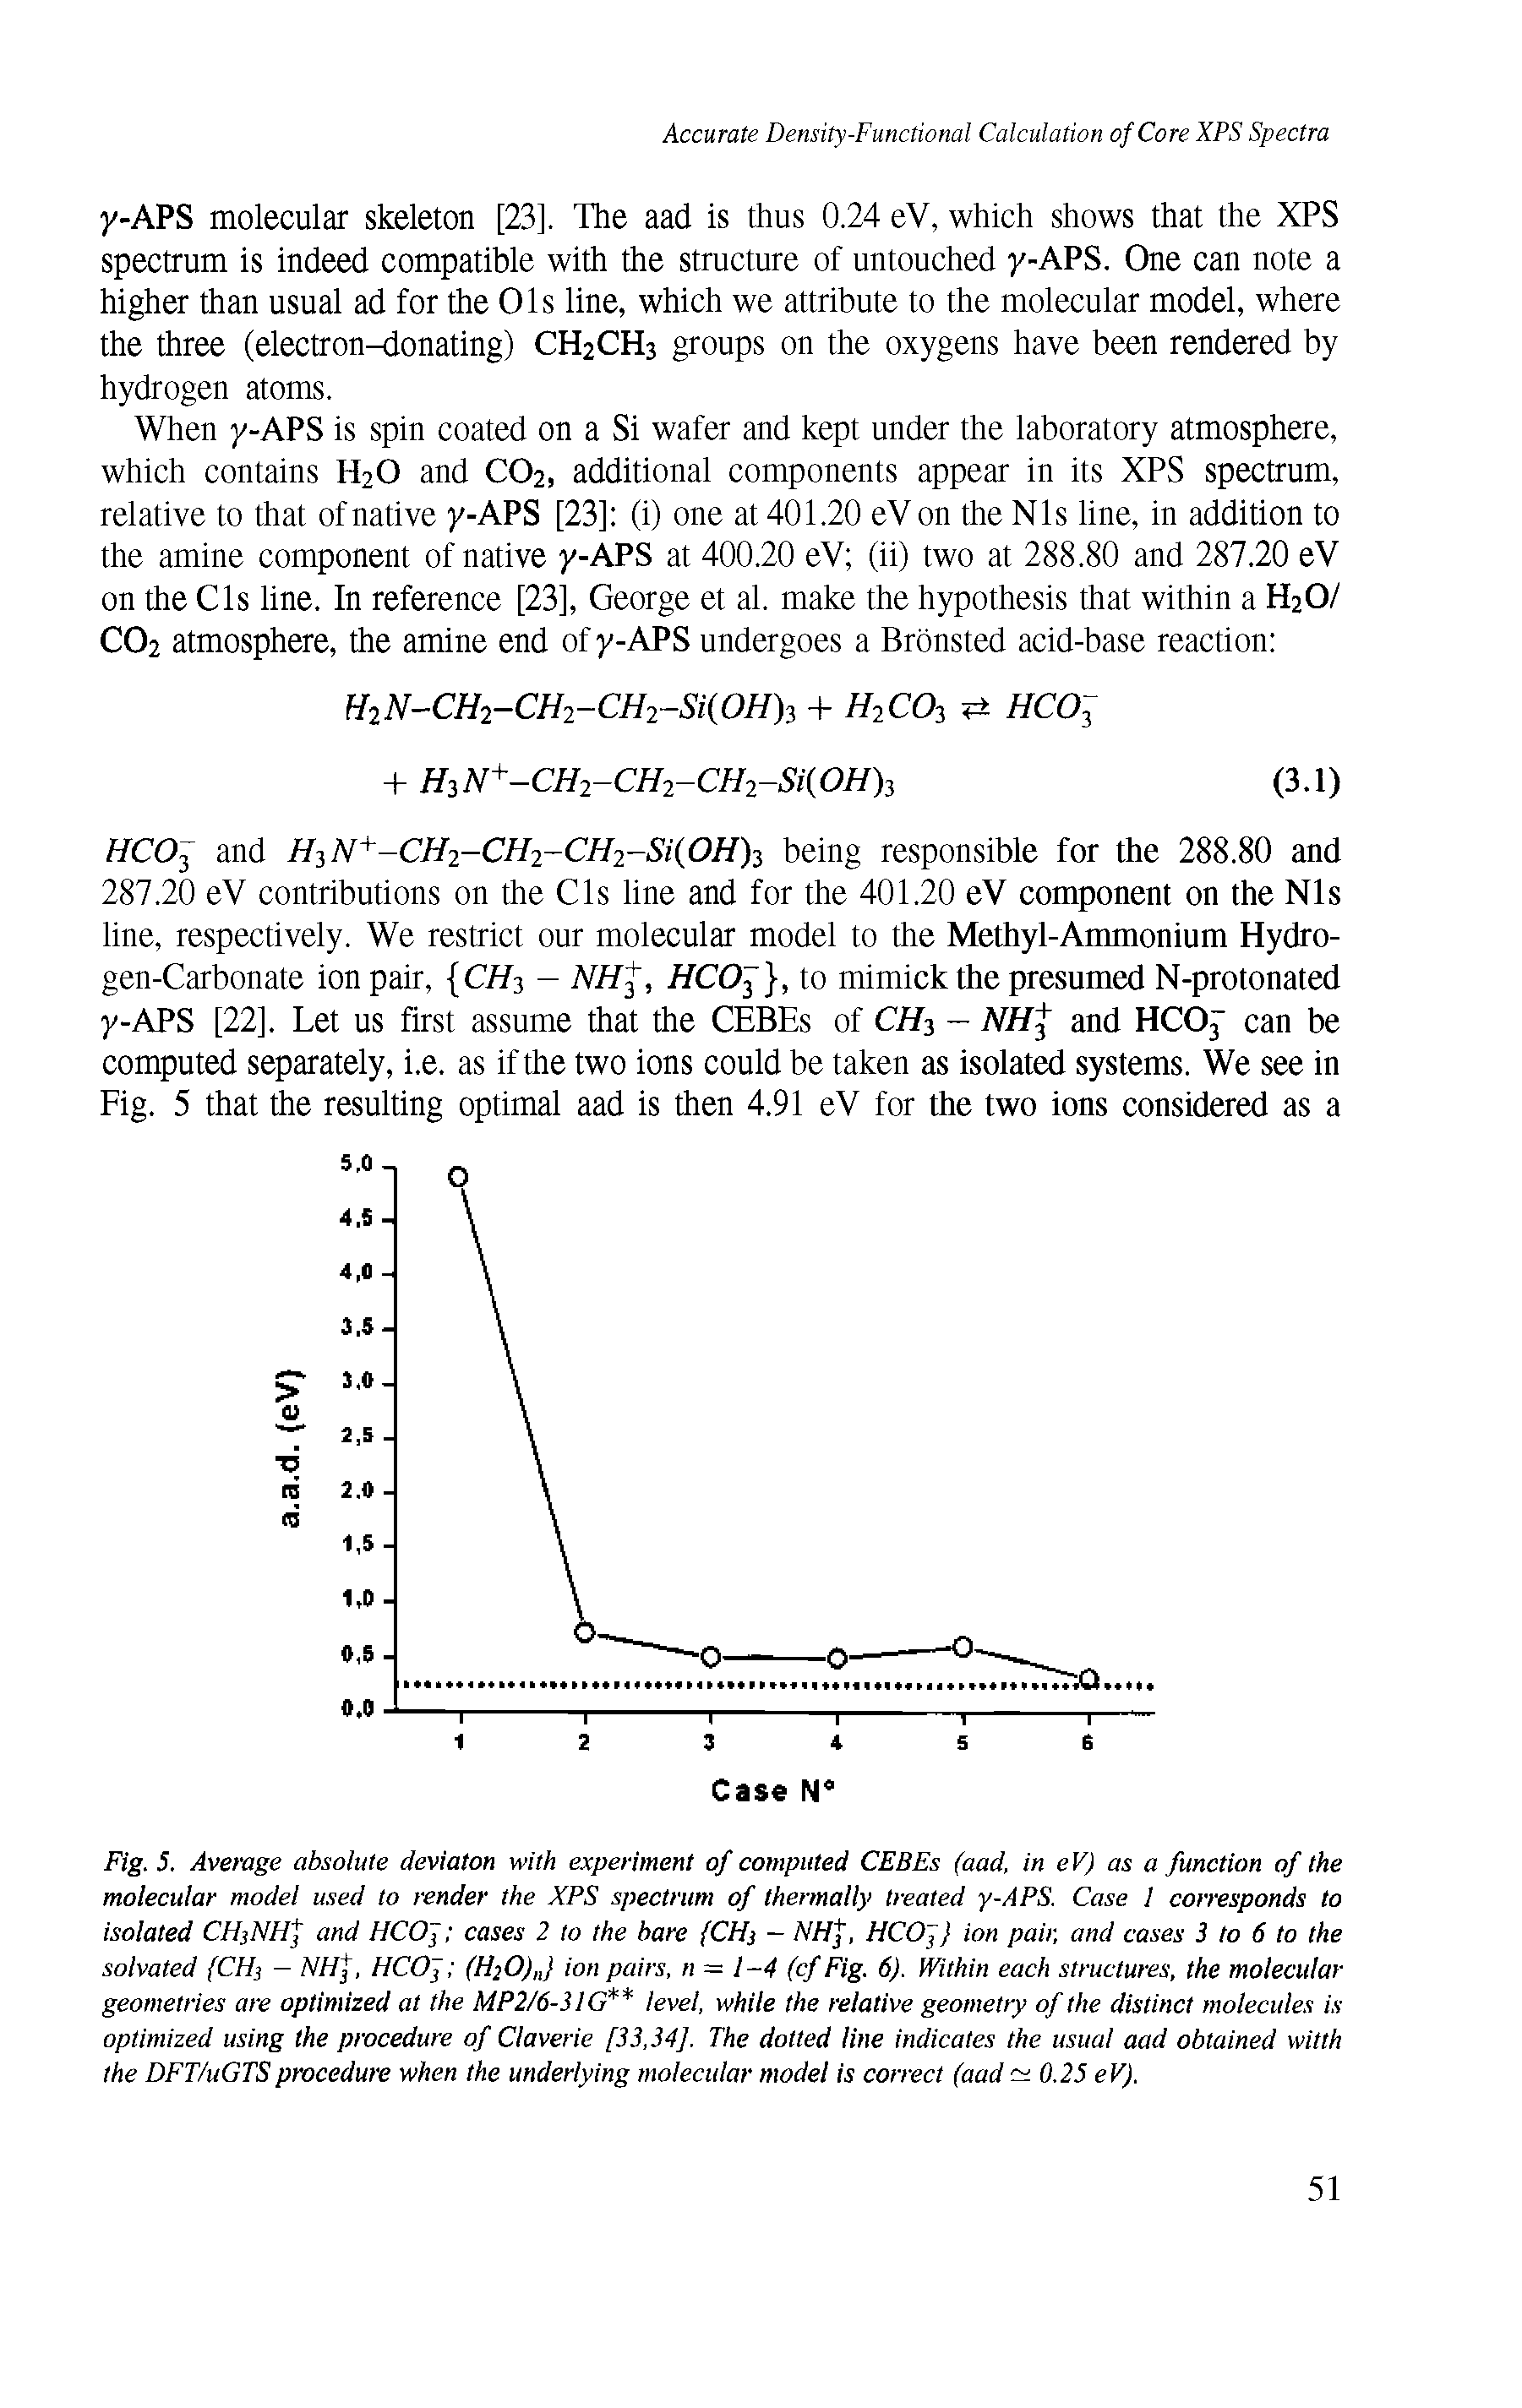 Fig. 5. Average absolute deviaton with experiment of computed CEBEs (aad, in eV) as a function of the molecular model used to render the XPS spectrum of thermally treated y-APS. Case 1 corresponds to isolated CHsNH and HCOJ cases 2 to the hare CHj - NH, HCO(j ion pair, and cases 3 to 6 to the solvated (CH — NHf HCOj (H2O), ion pairs, n = 1-4 (cf Fig. 6). Within each structures, the molecular geometries are optimized at the MP2/6-3IG level, while the relative geometry of the distinct molecules is optimized using the procedure of Claverie [33,34]. The dotted line indicates the usual aad obtained witth the DFT/uGTS procedure when the underlying molecular model is correct (aad 0.25 eV).